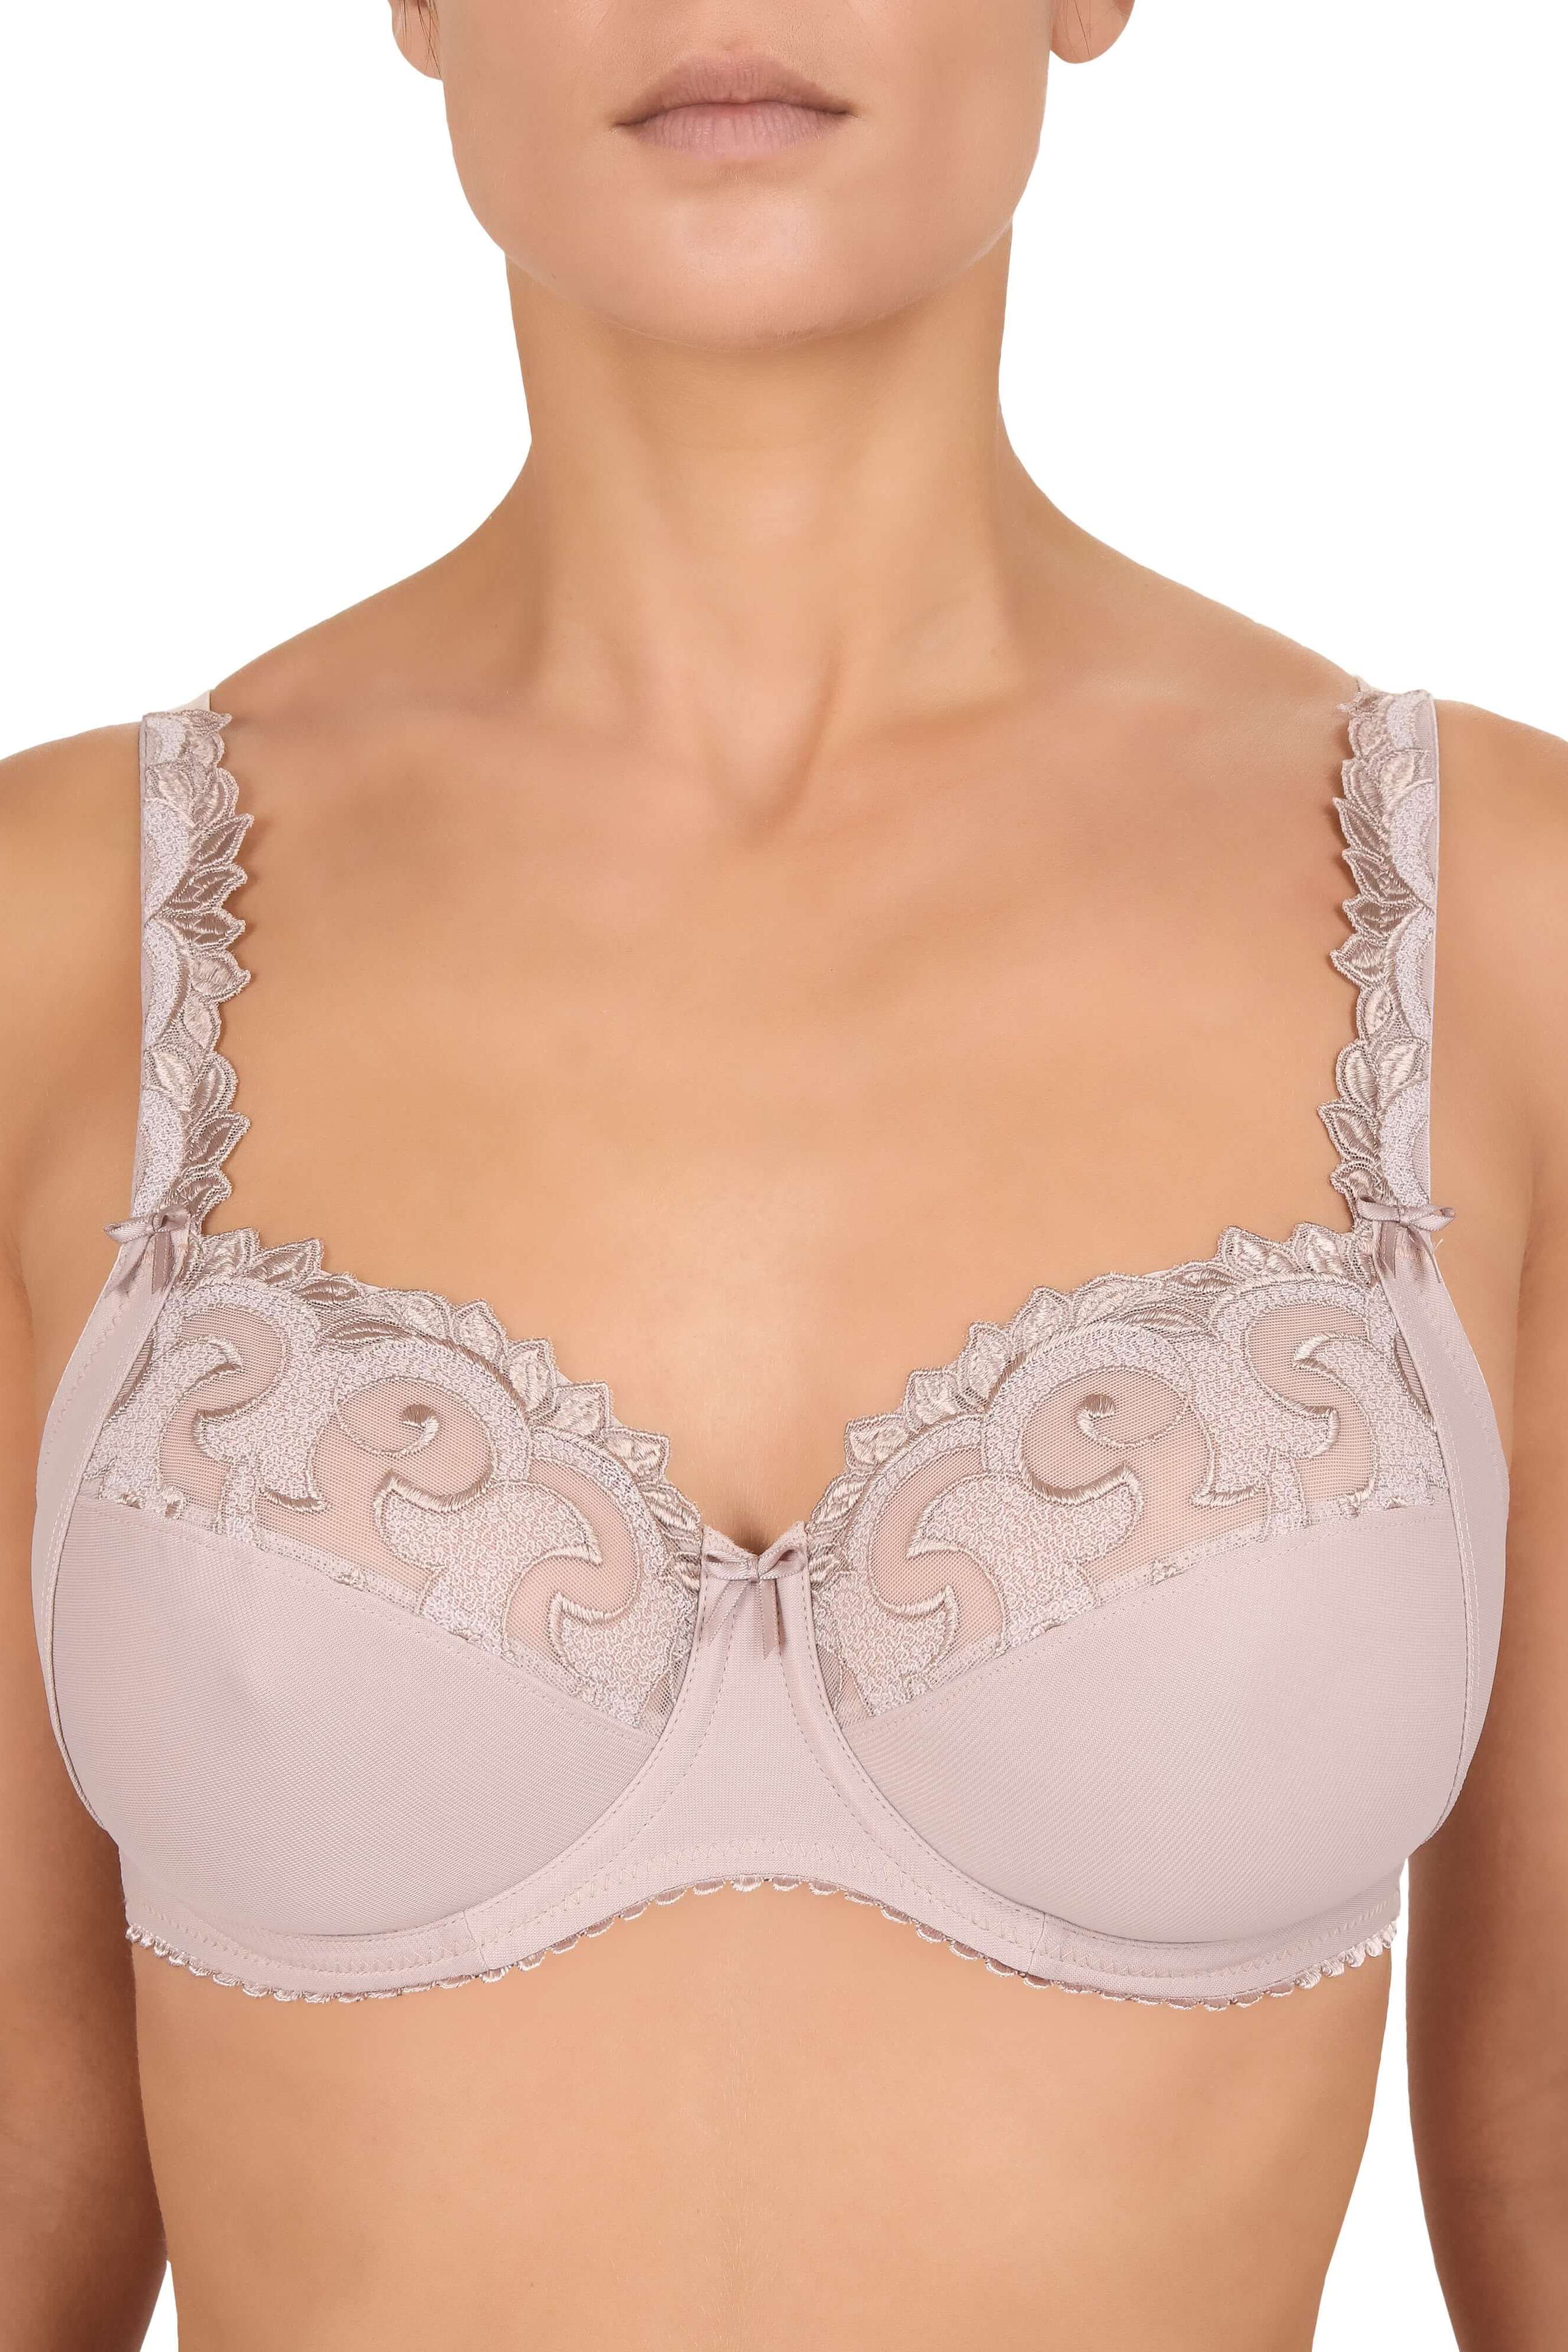 Paramour by Felina  Tempting Plush All Over Lace Underwire Bra  (Honeysuckle, 36DDD) 